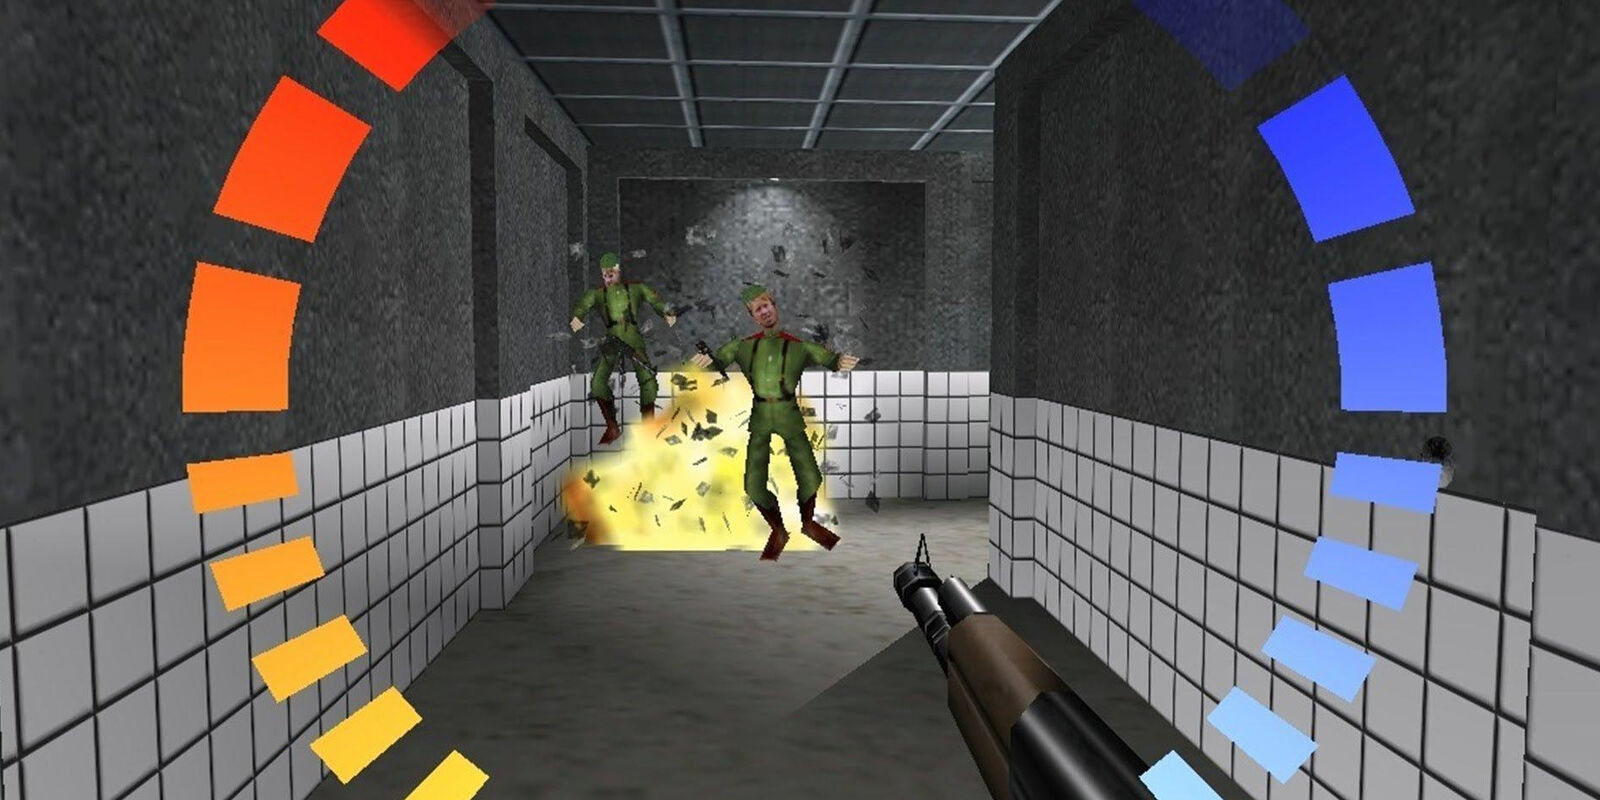 GoldenEye 007 is coming to Xbox on January 27th - XboxEra